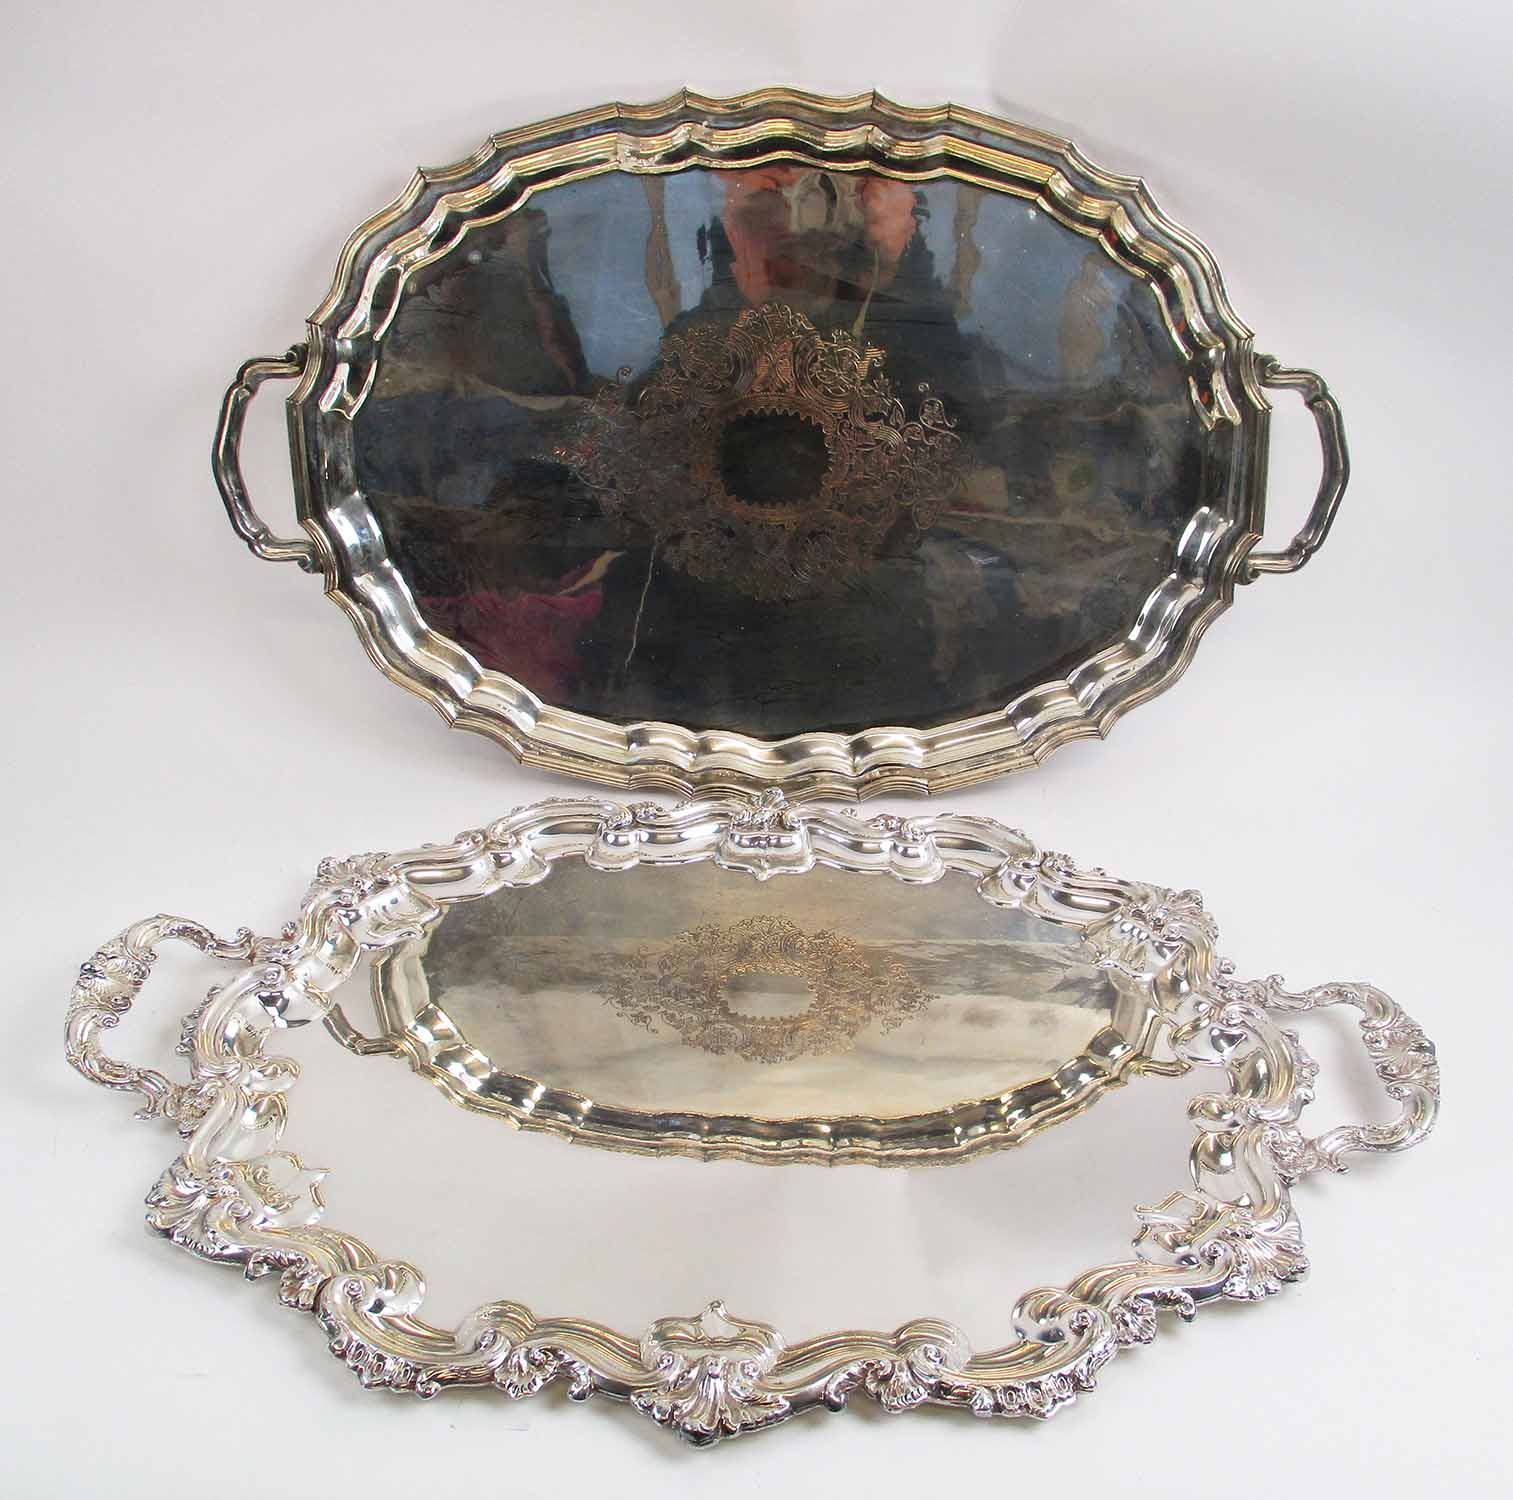 TWO LARGE SILVER PLATED SERVING TRAYS, each approximately 72cm x 50cm.